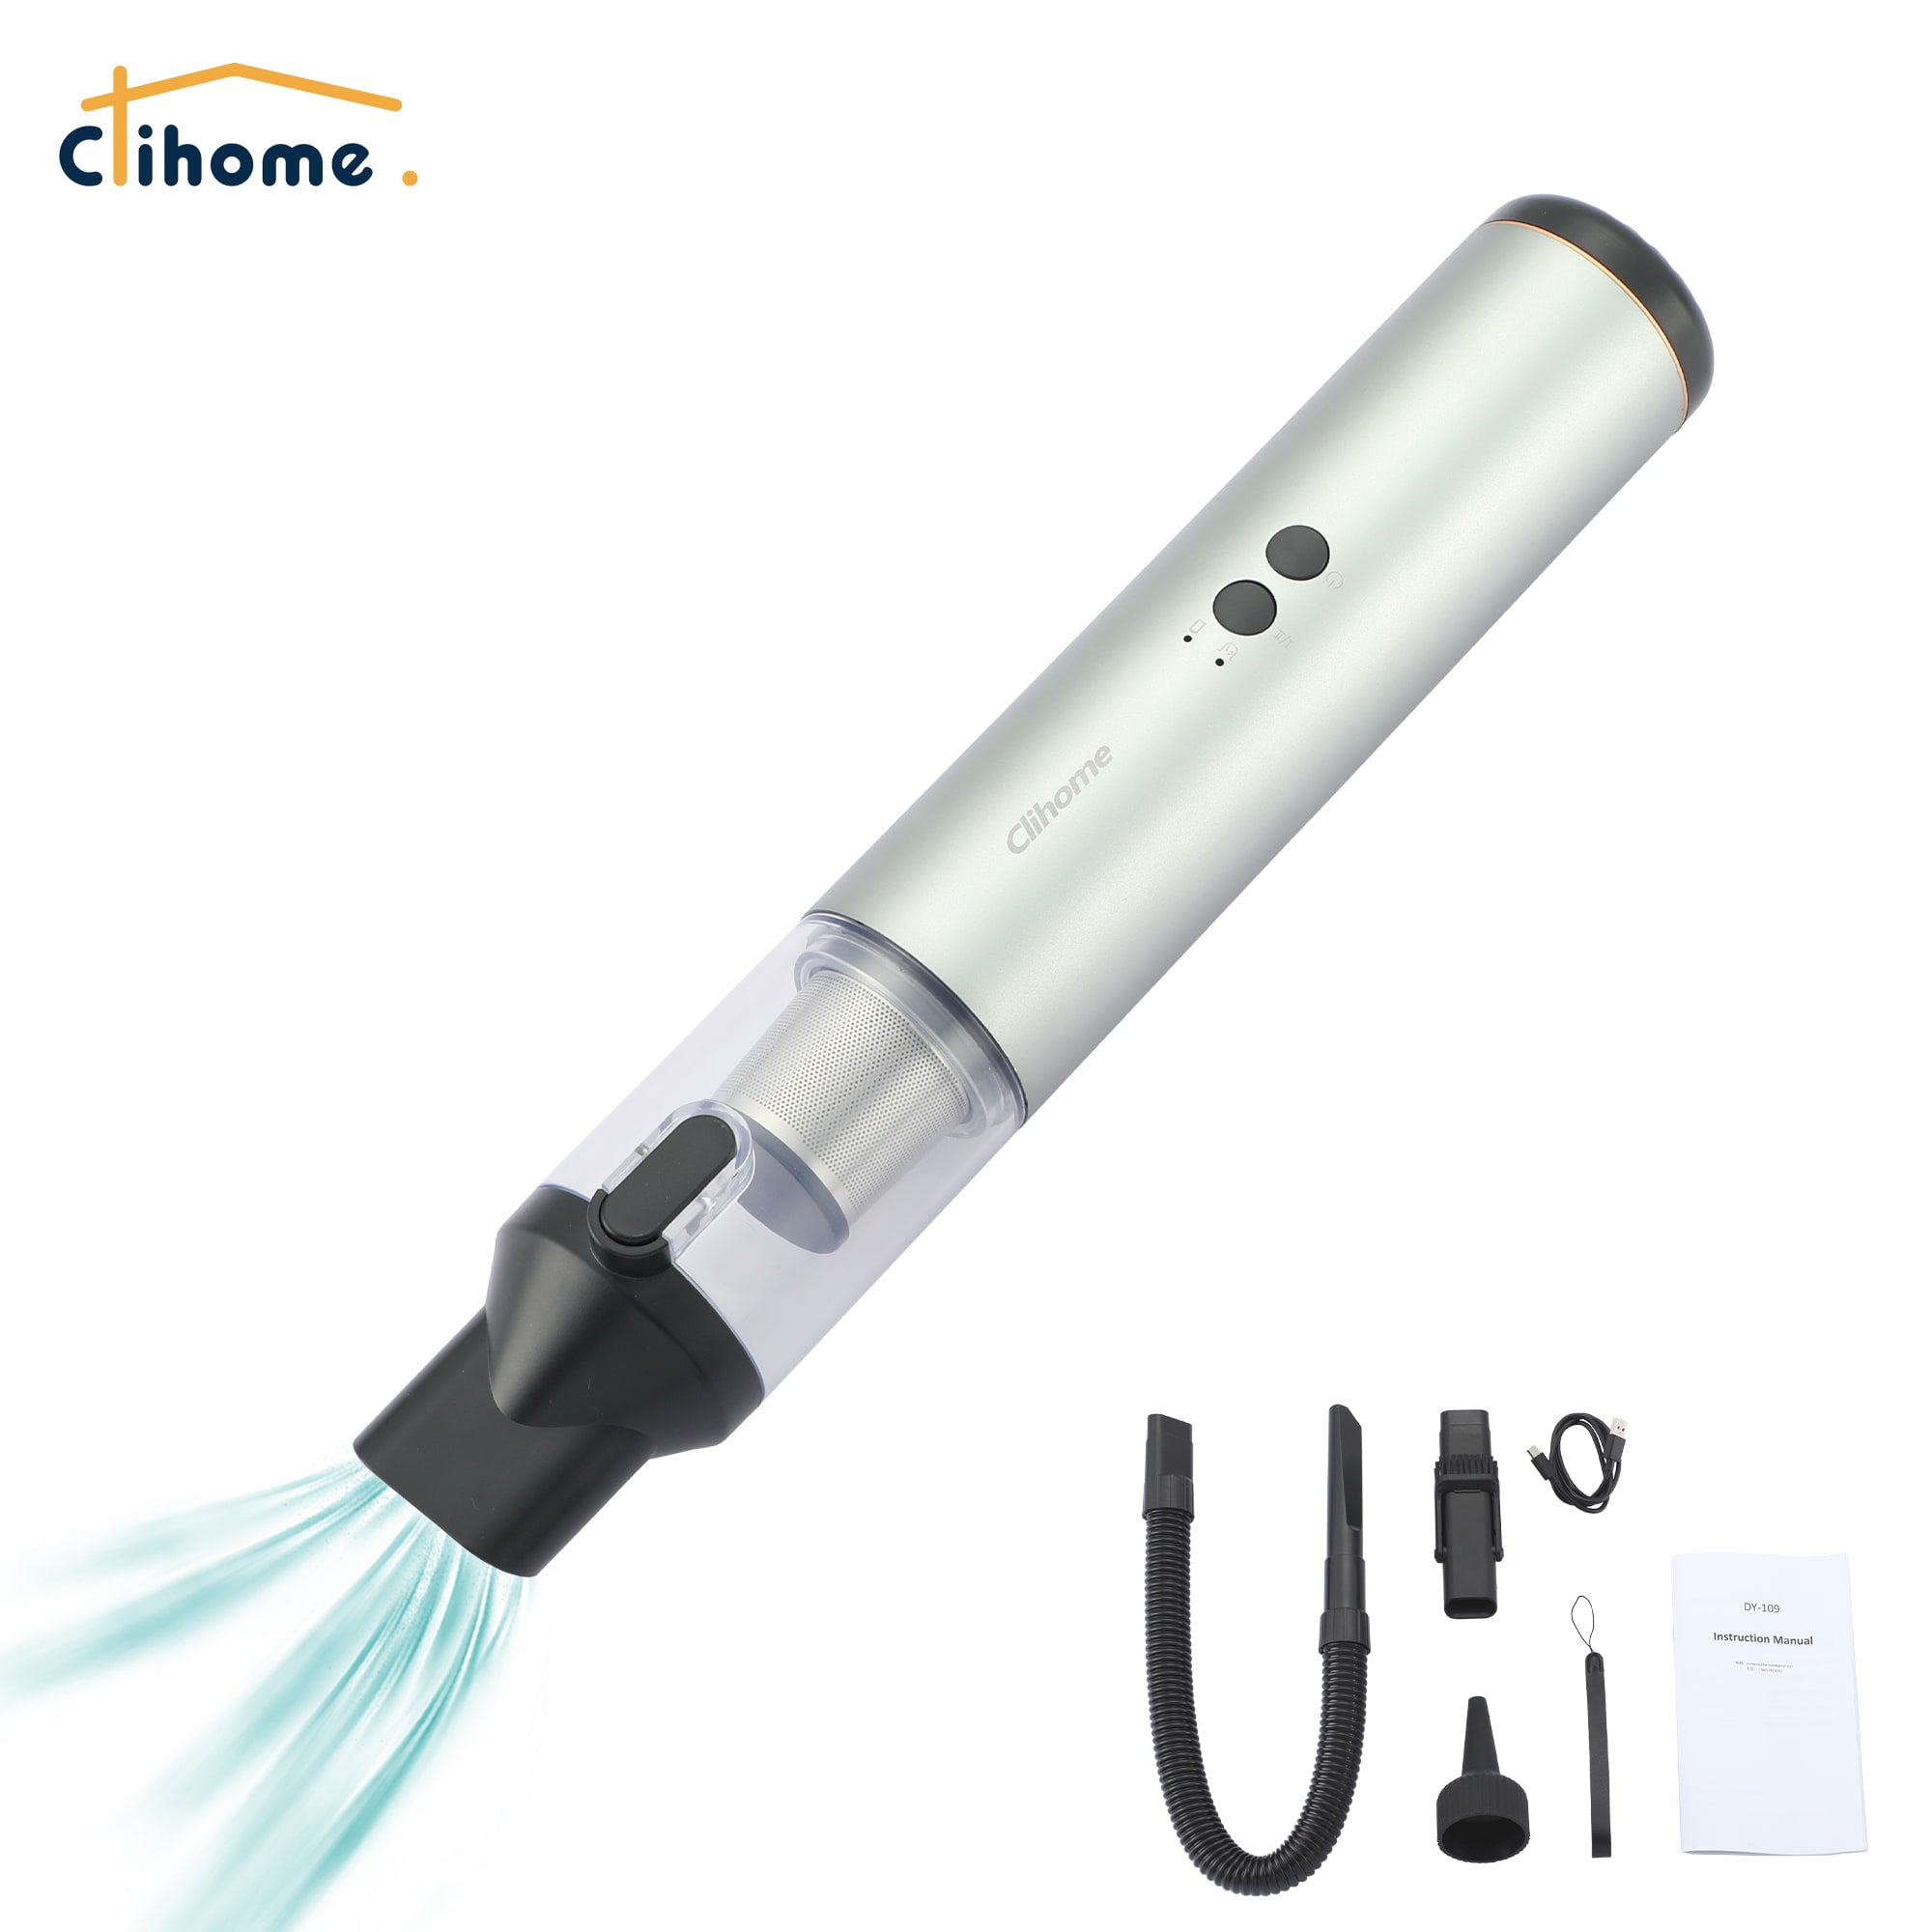 Clihome 1.3lbs Lithium Ion Strong Suction Handheld Cordless Vacuum Cleaner